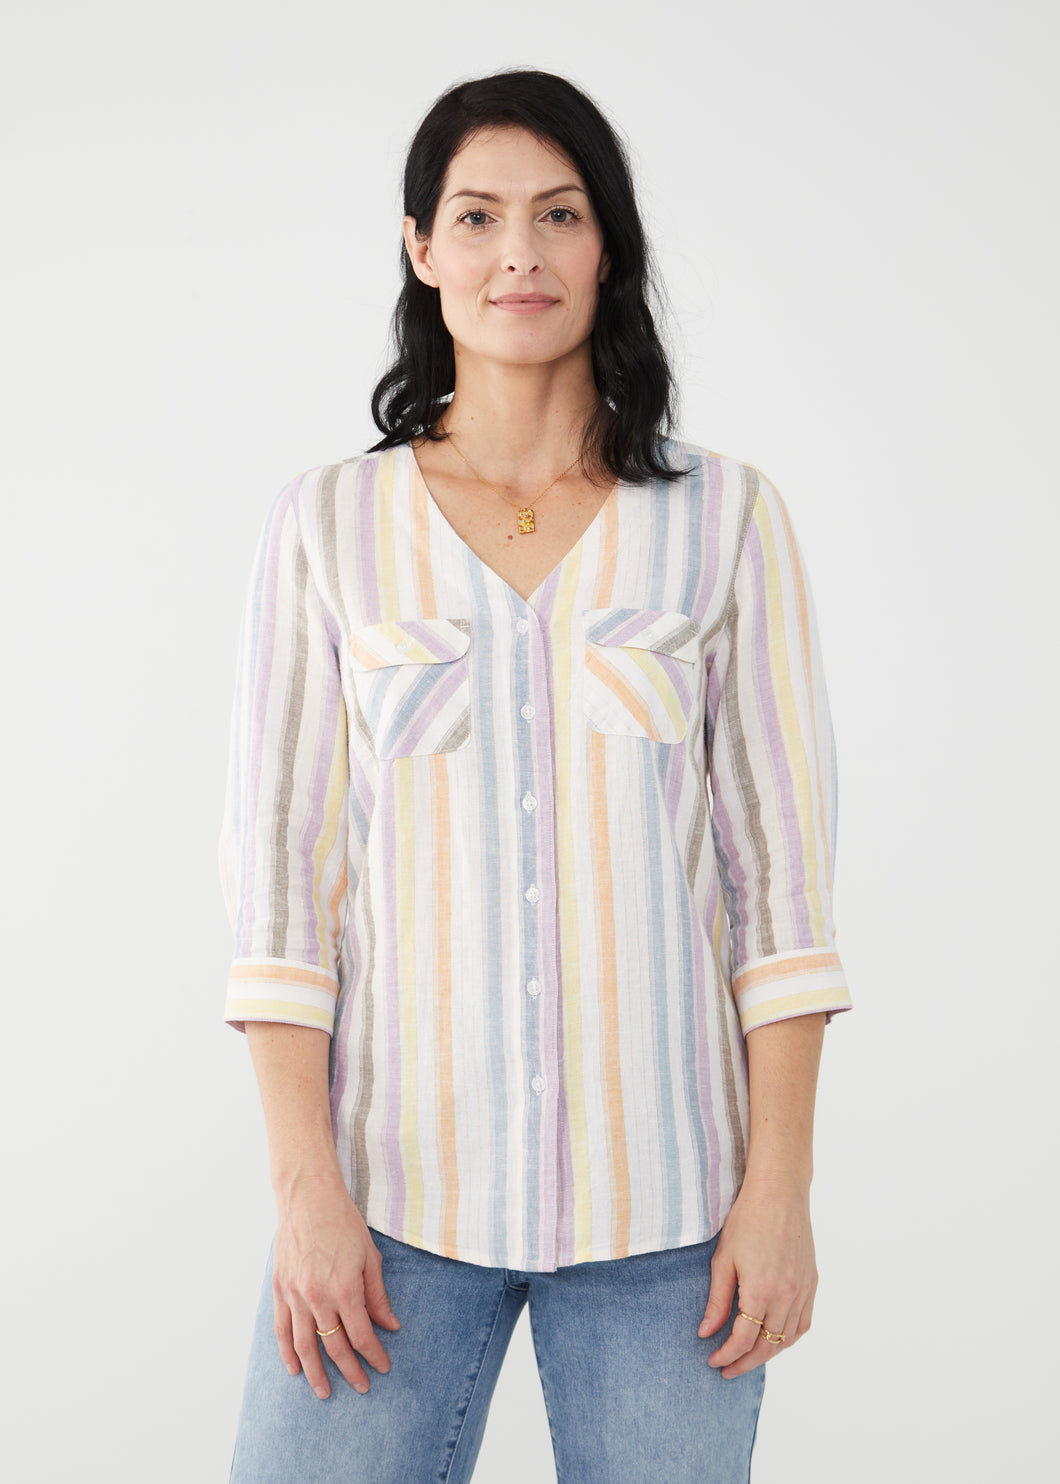 Nothing says Spring/Summer fashion than a top with a beautiful array of pastel colors in a stripe pattern.  Add a little gold shimmer threading throughout and you have the perfect top to pair with so many of your favorite bottoms. Show off your favorite piece of jewelry with a V-neck design.  